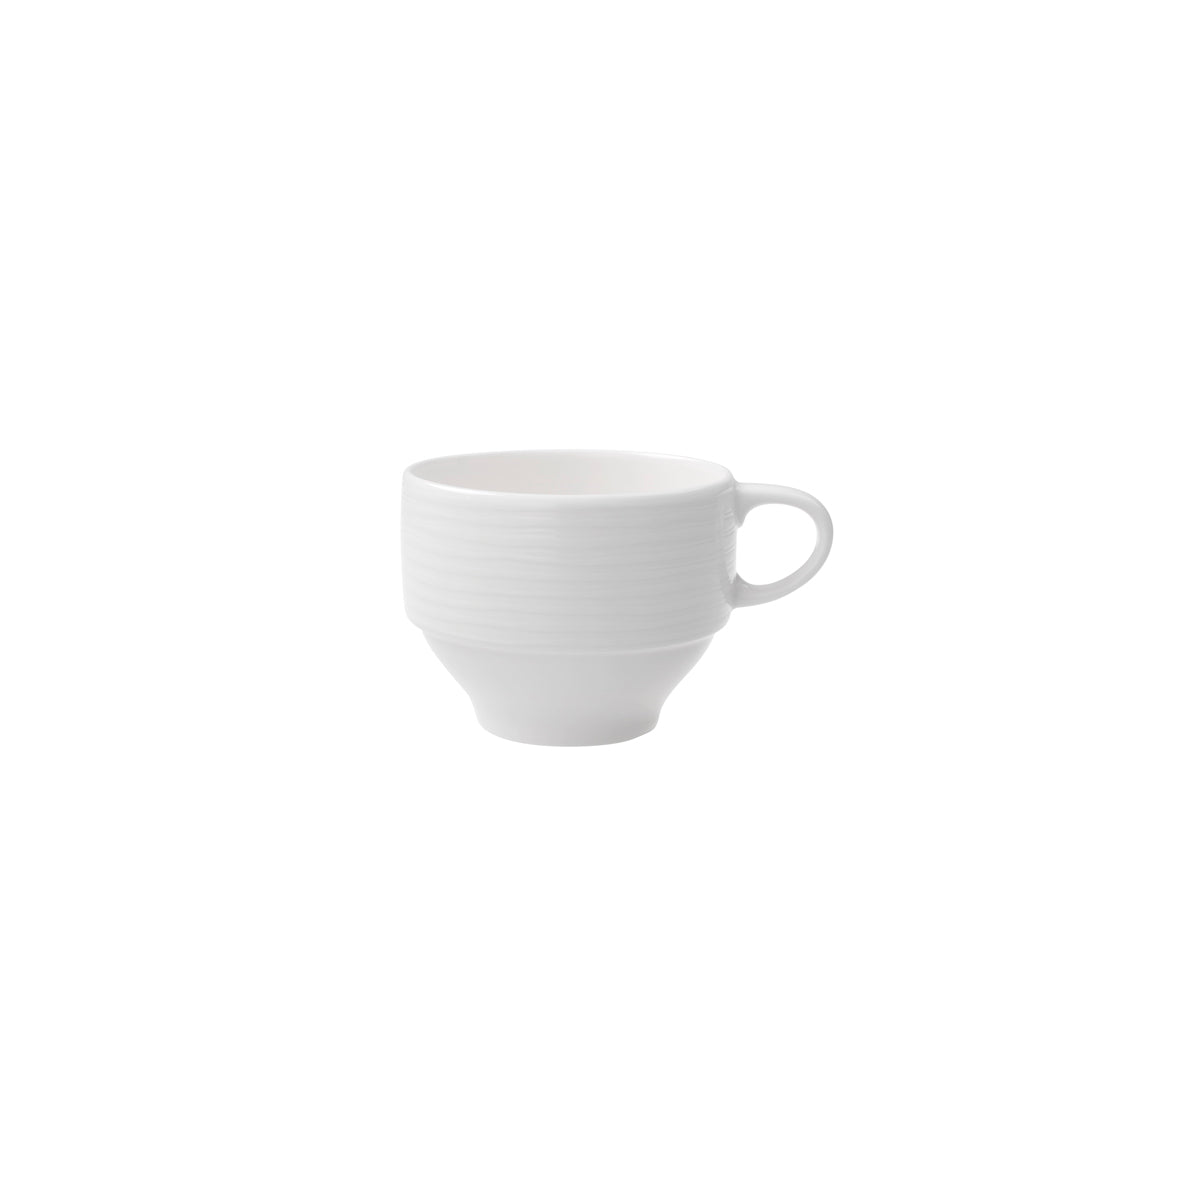 VB16-3356-1271 Villeroy And Boch Villeroy And Boch Sedona White Cup No. 2 Stackable 220ml Tomkin Australia Hospitality Supplies